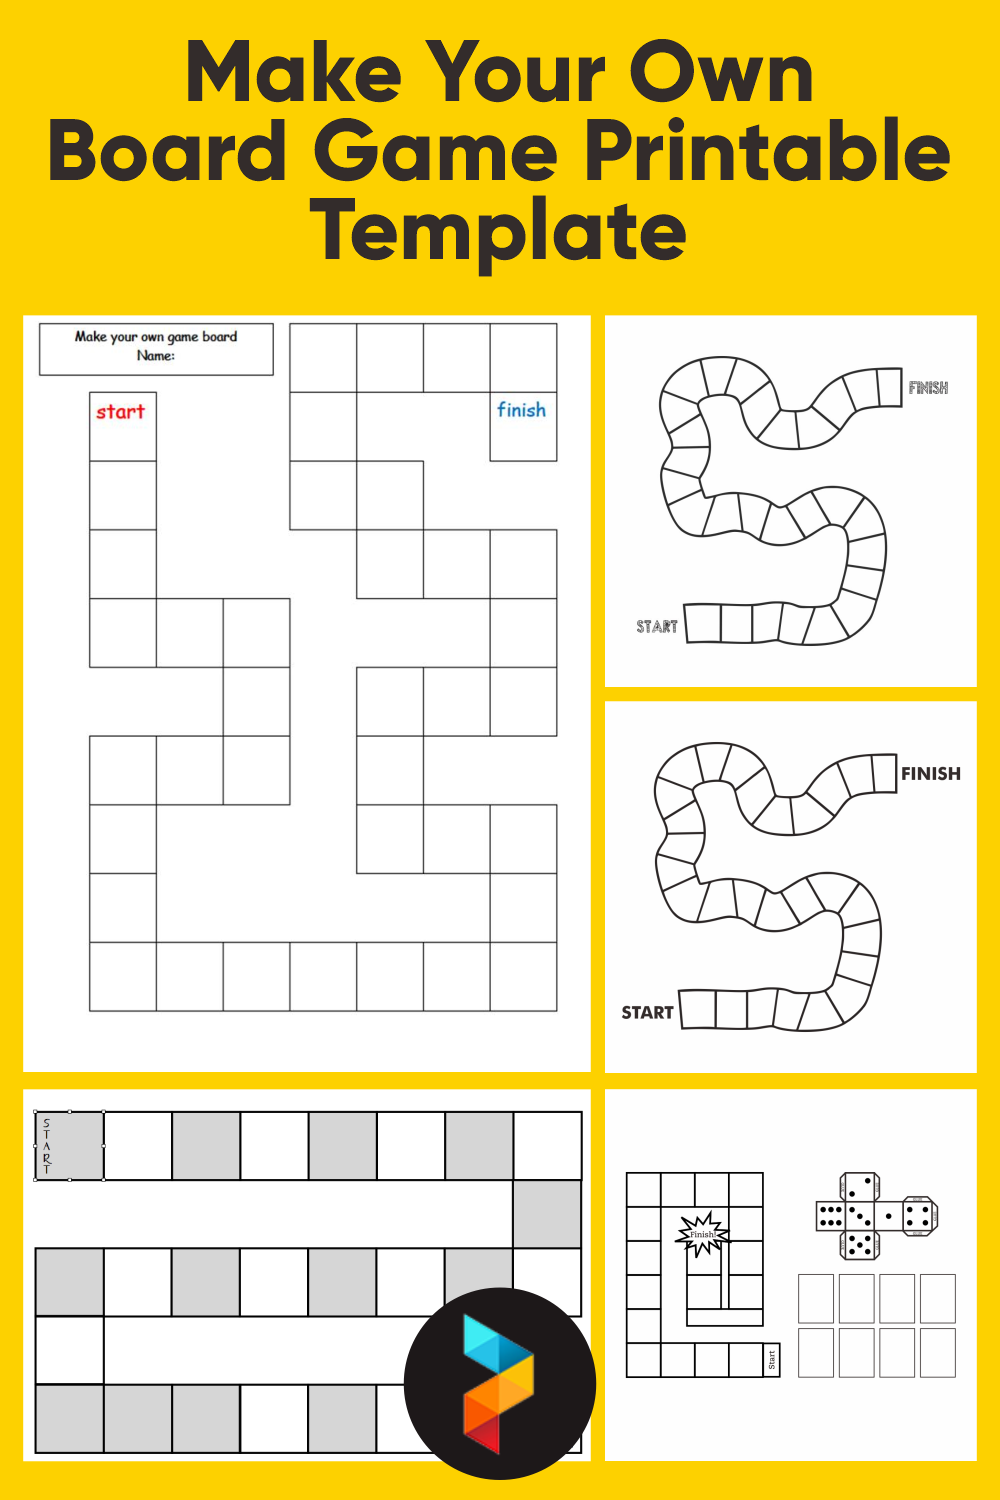 Make Your Own Board Game Printable Template